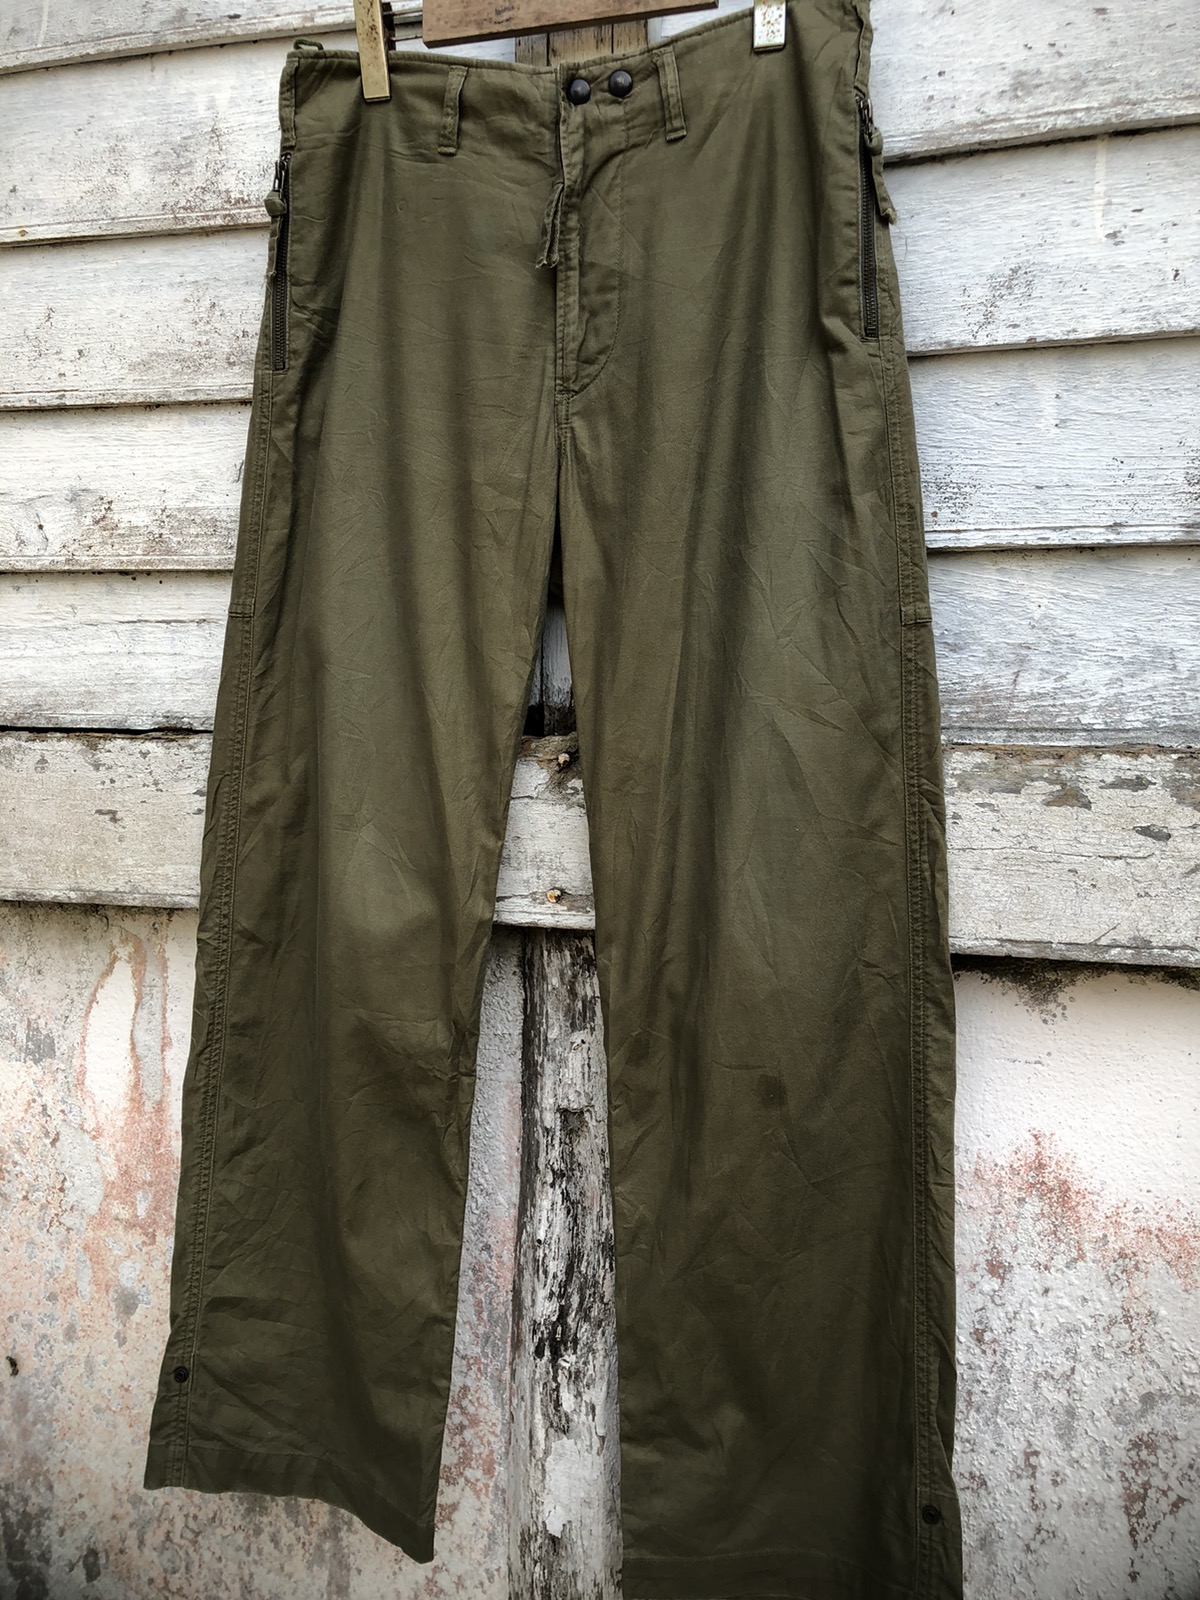 N. Hollywood Military Issues Trouser - 2